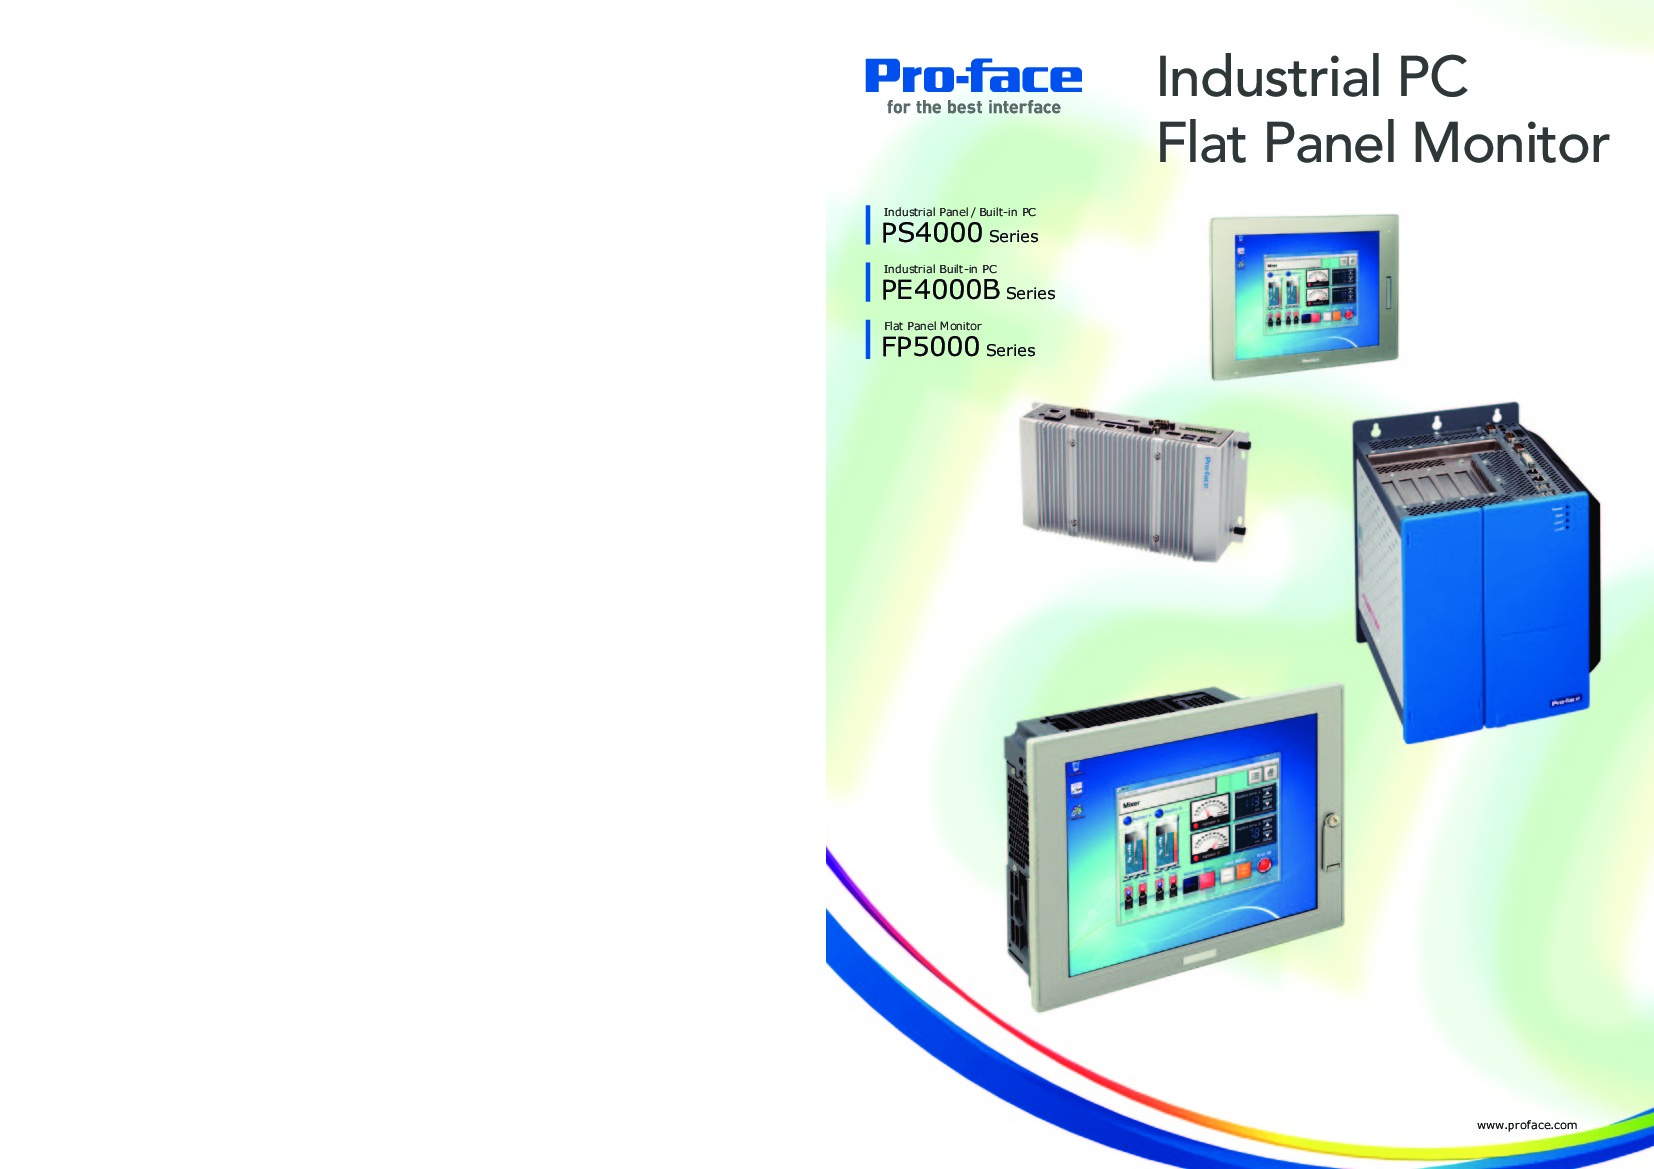 First Page Image of PFXPP170BA10N00N00 PS4000 Series Pro-Face Catalog.pdf